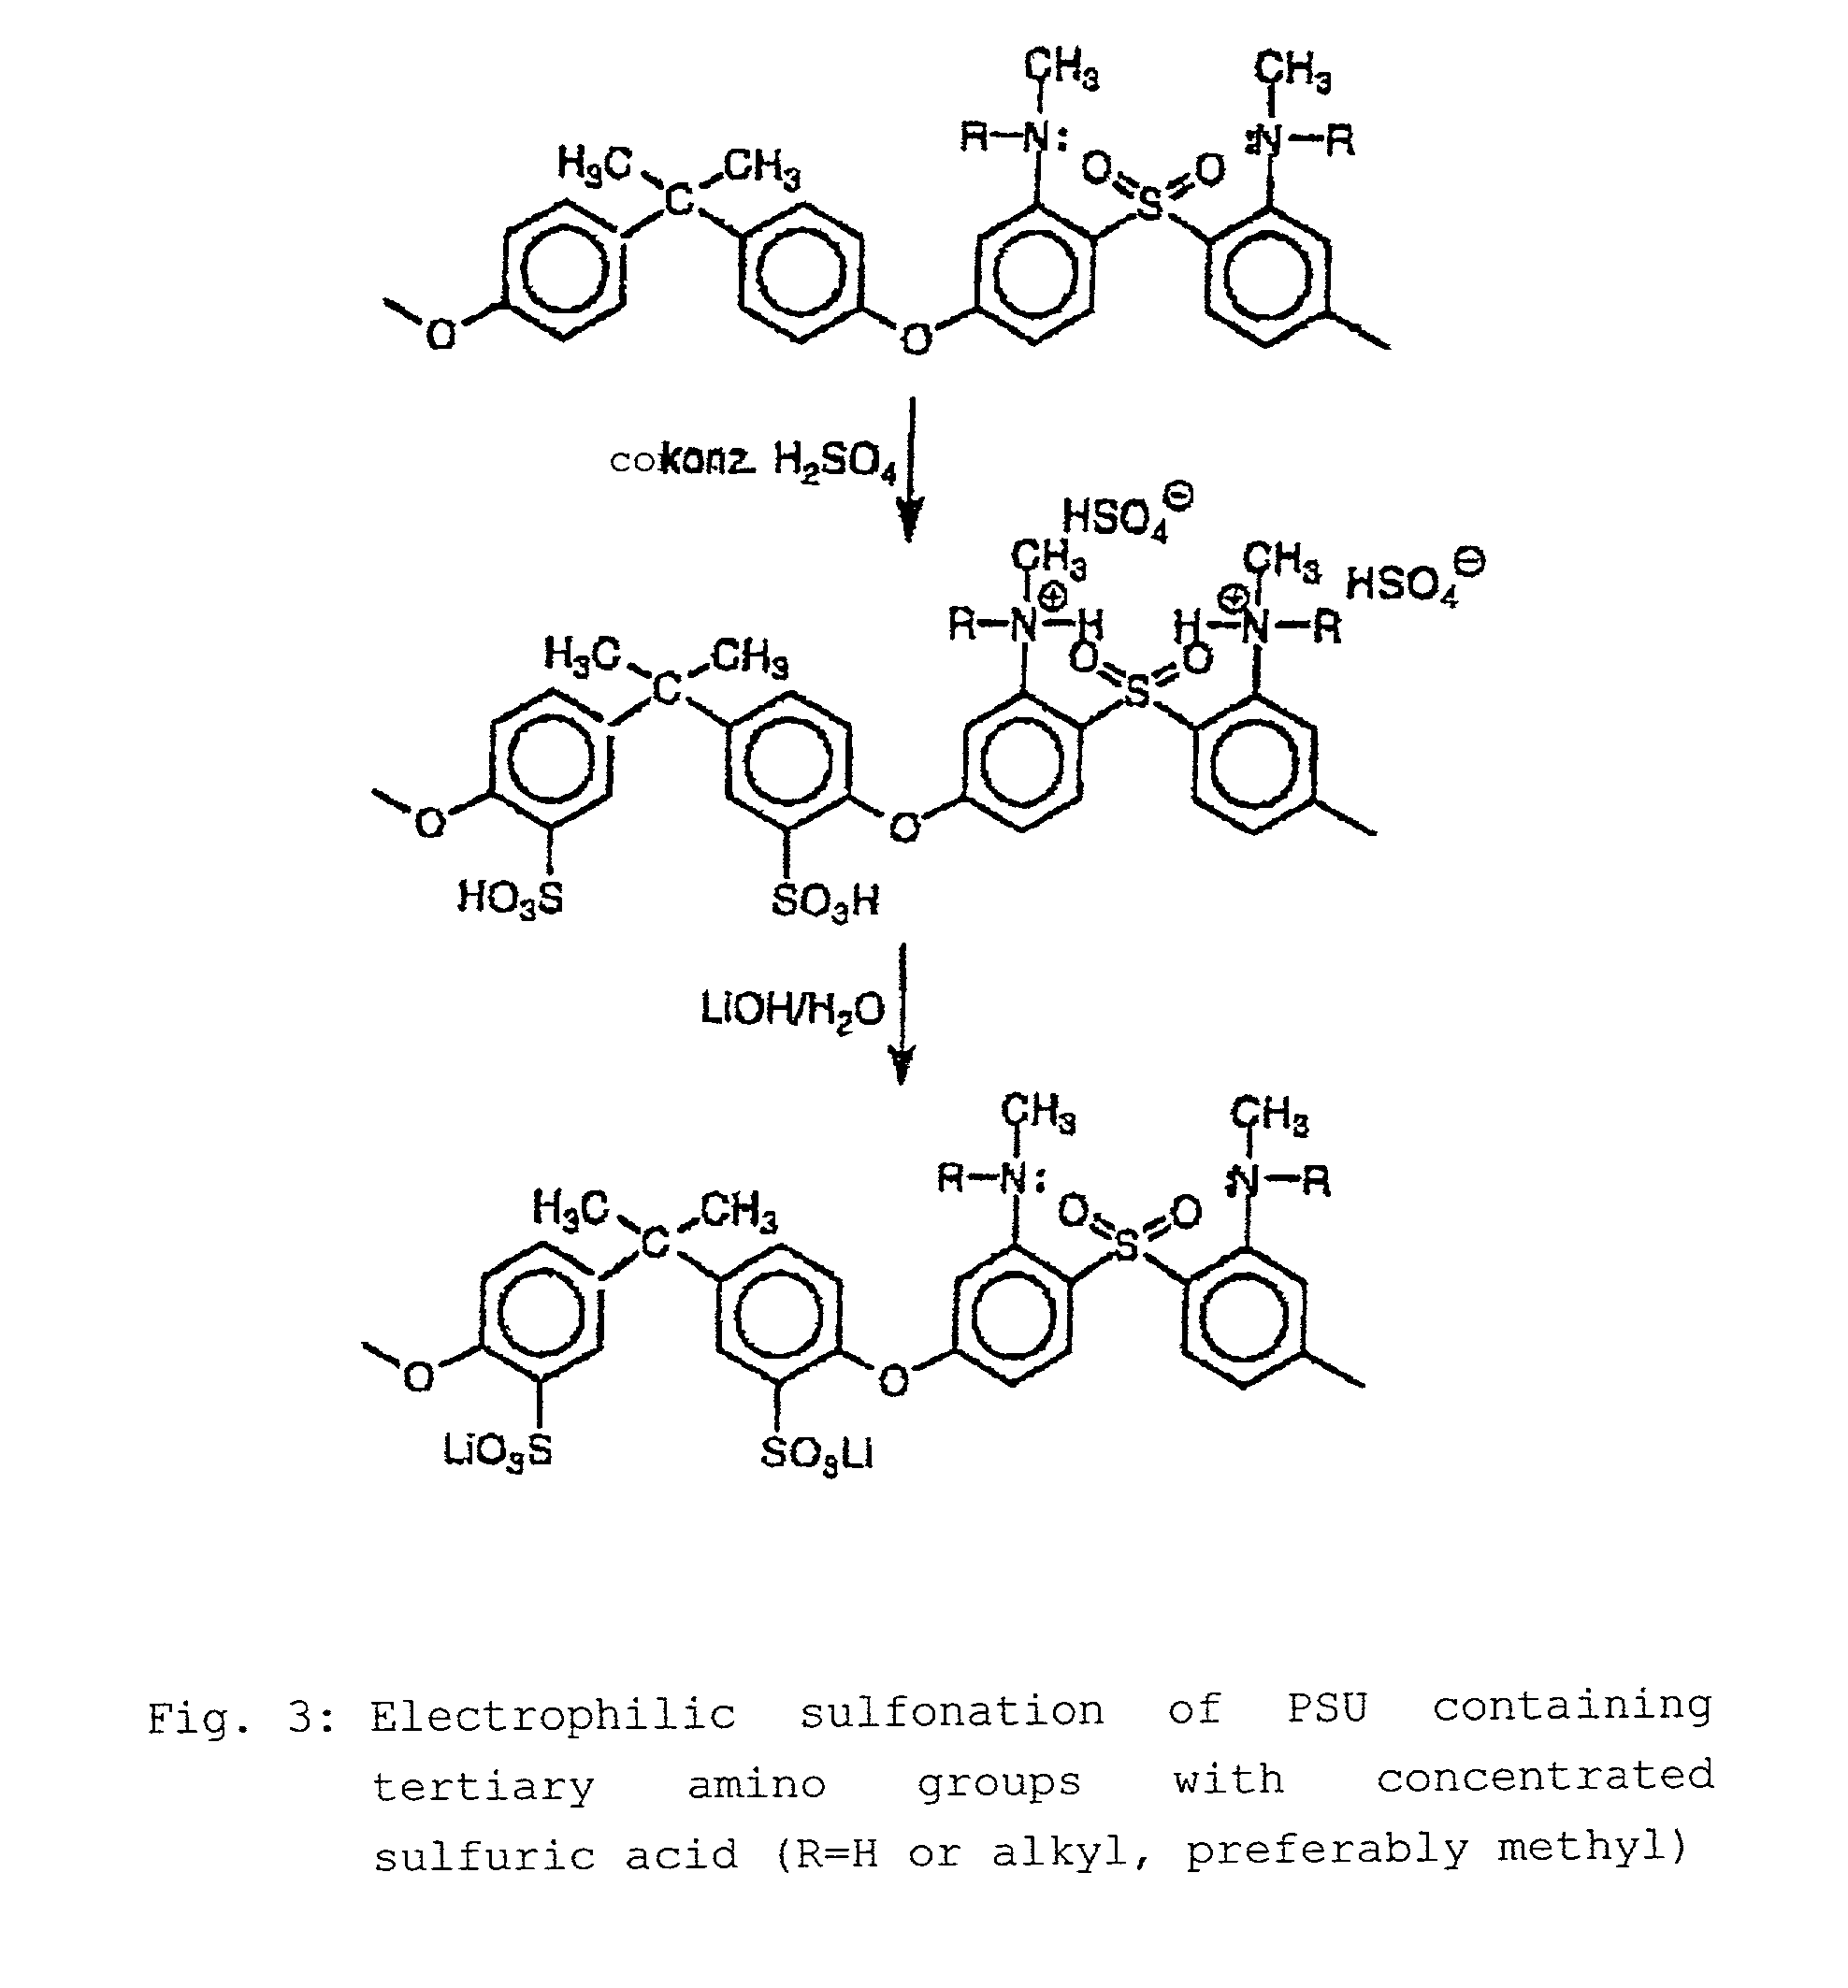 Step-by-step alkylation of polymeric amines